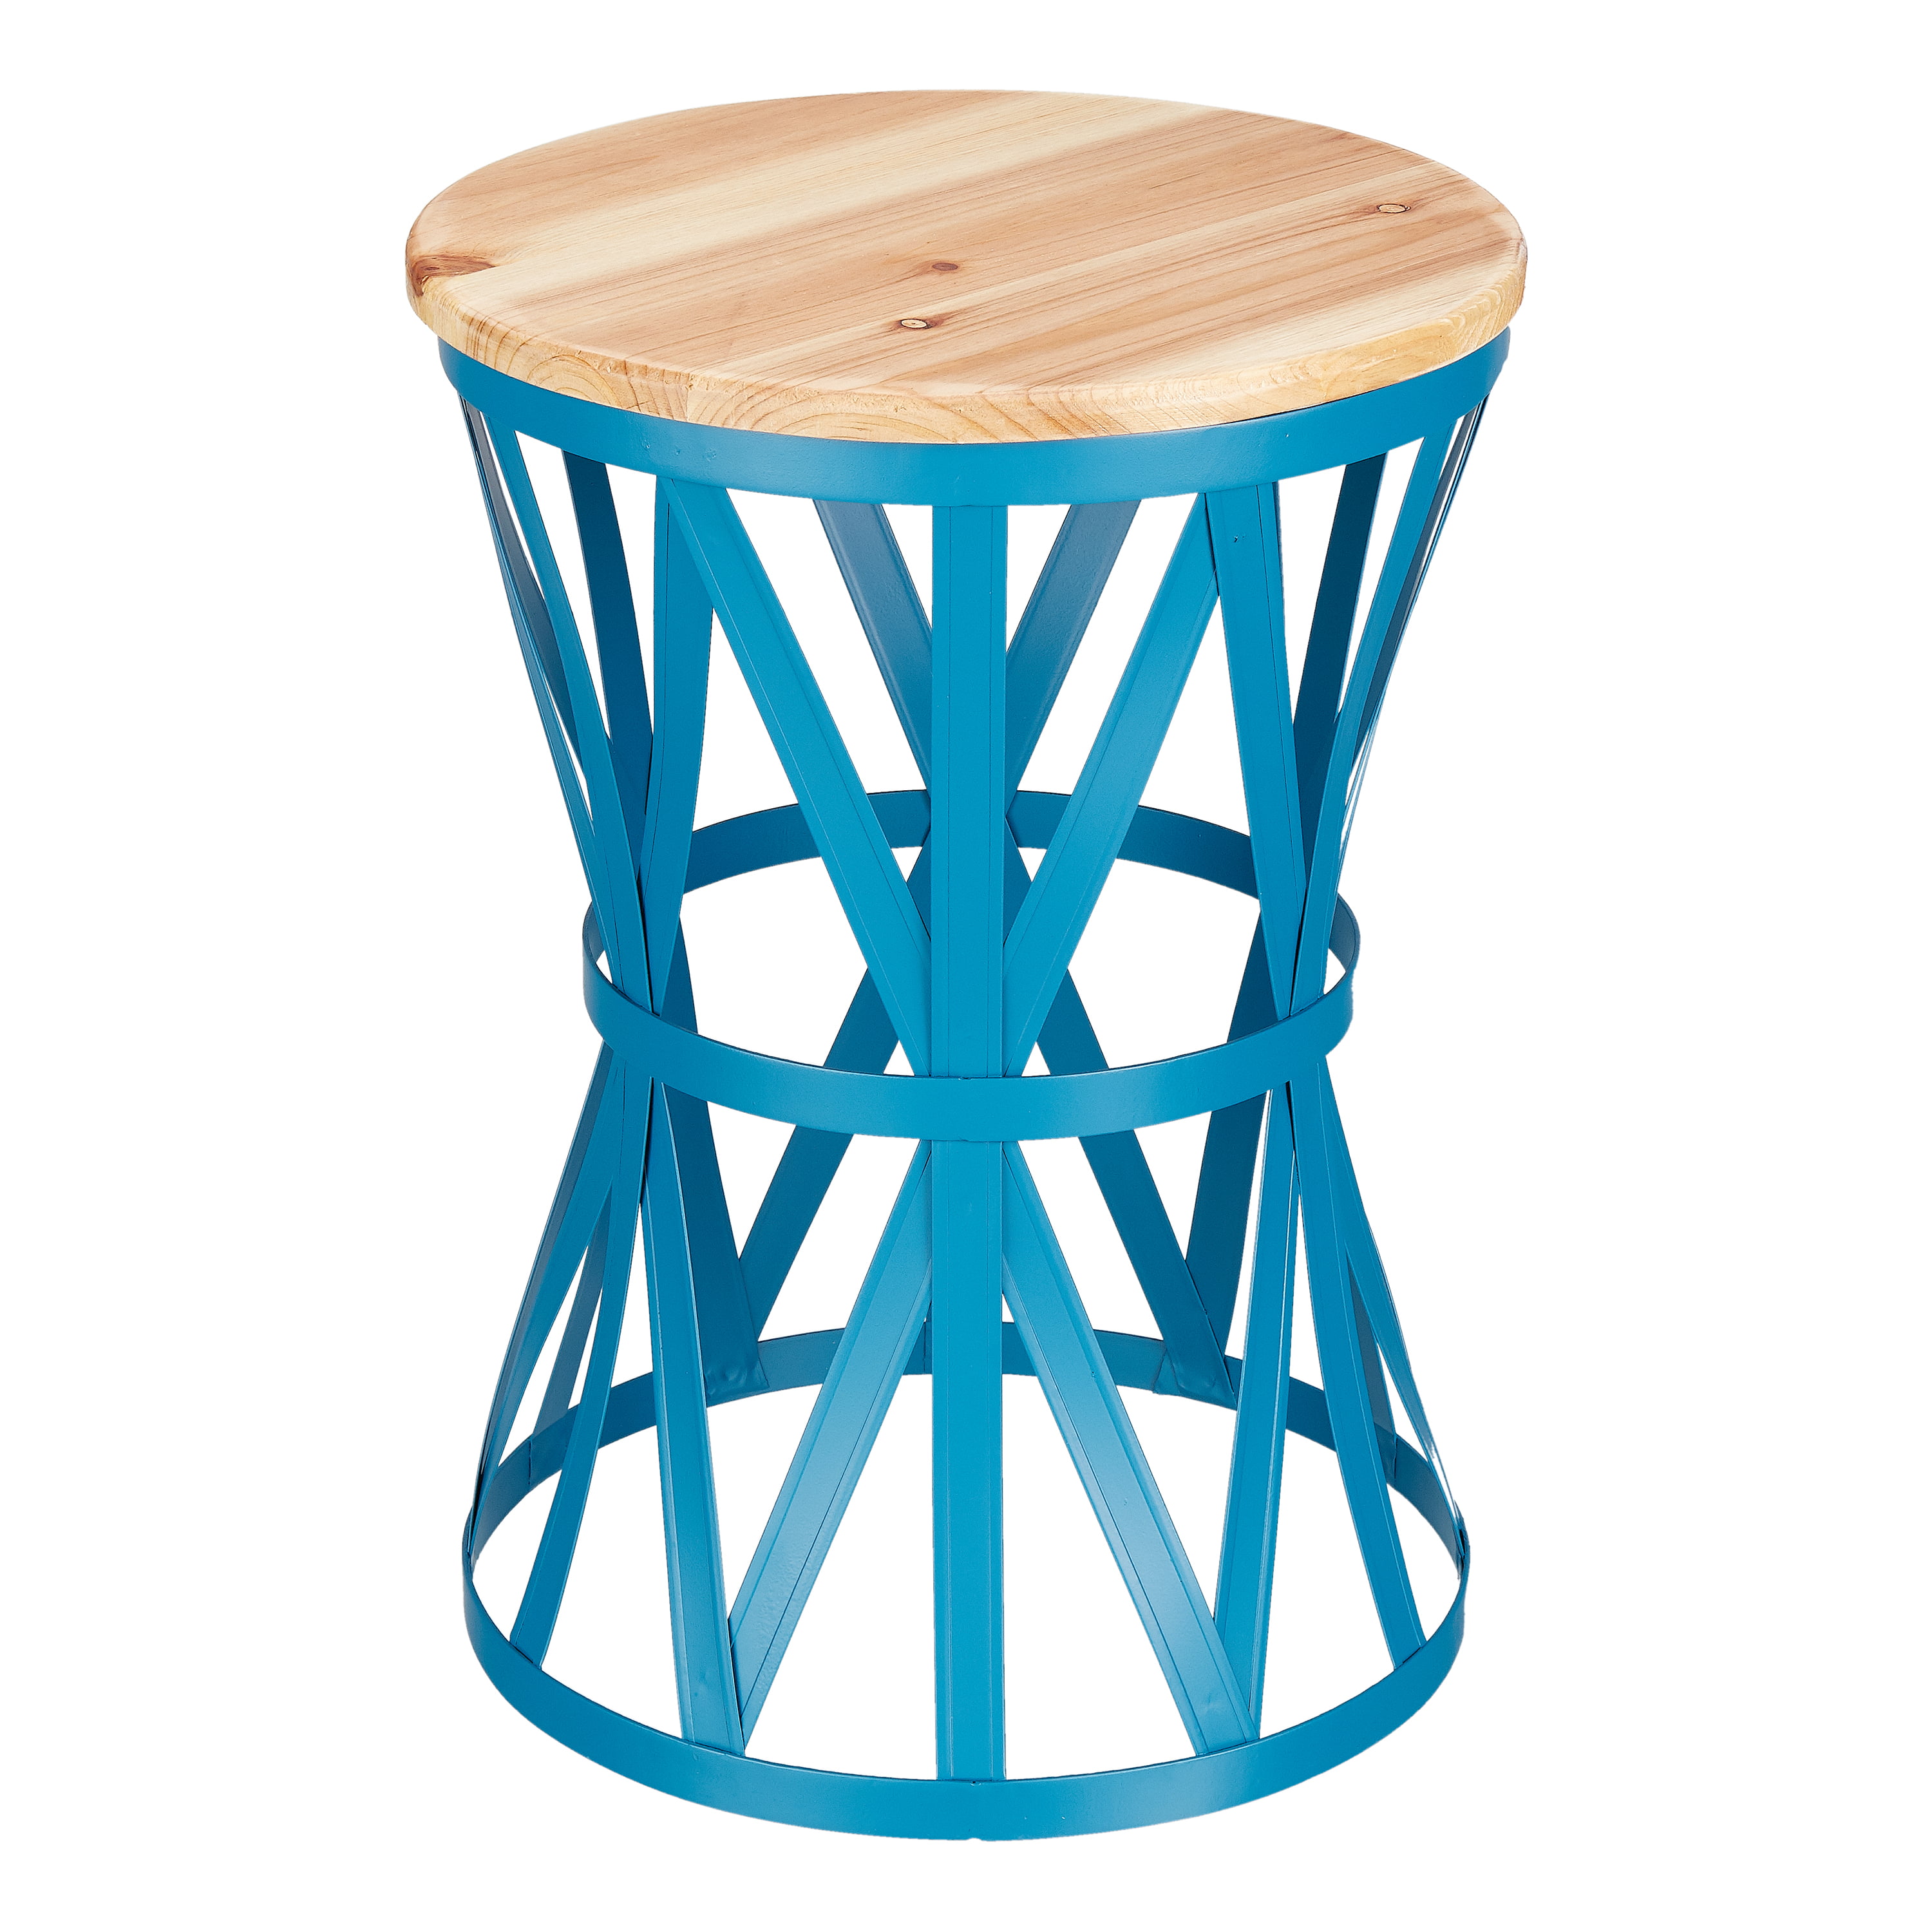 Mainstays Forset 18 Teal Metal Garden Stool With Wood Top